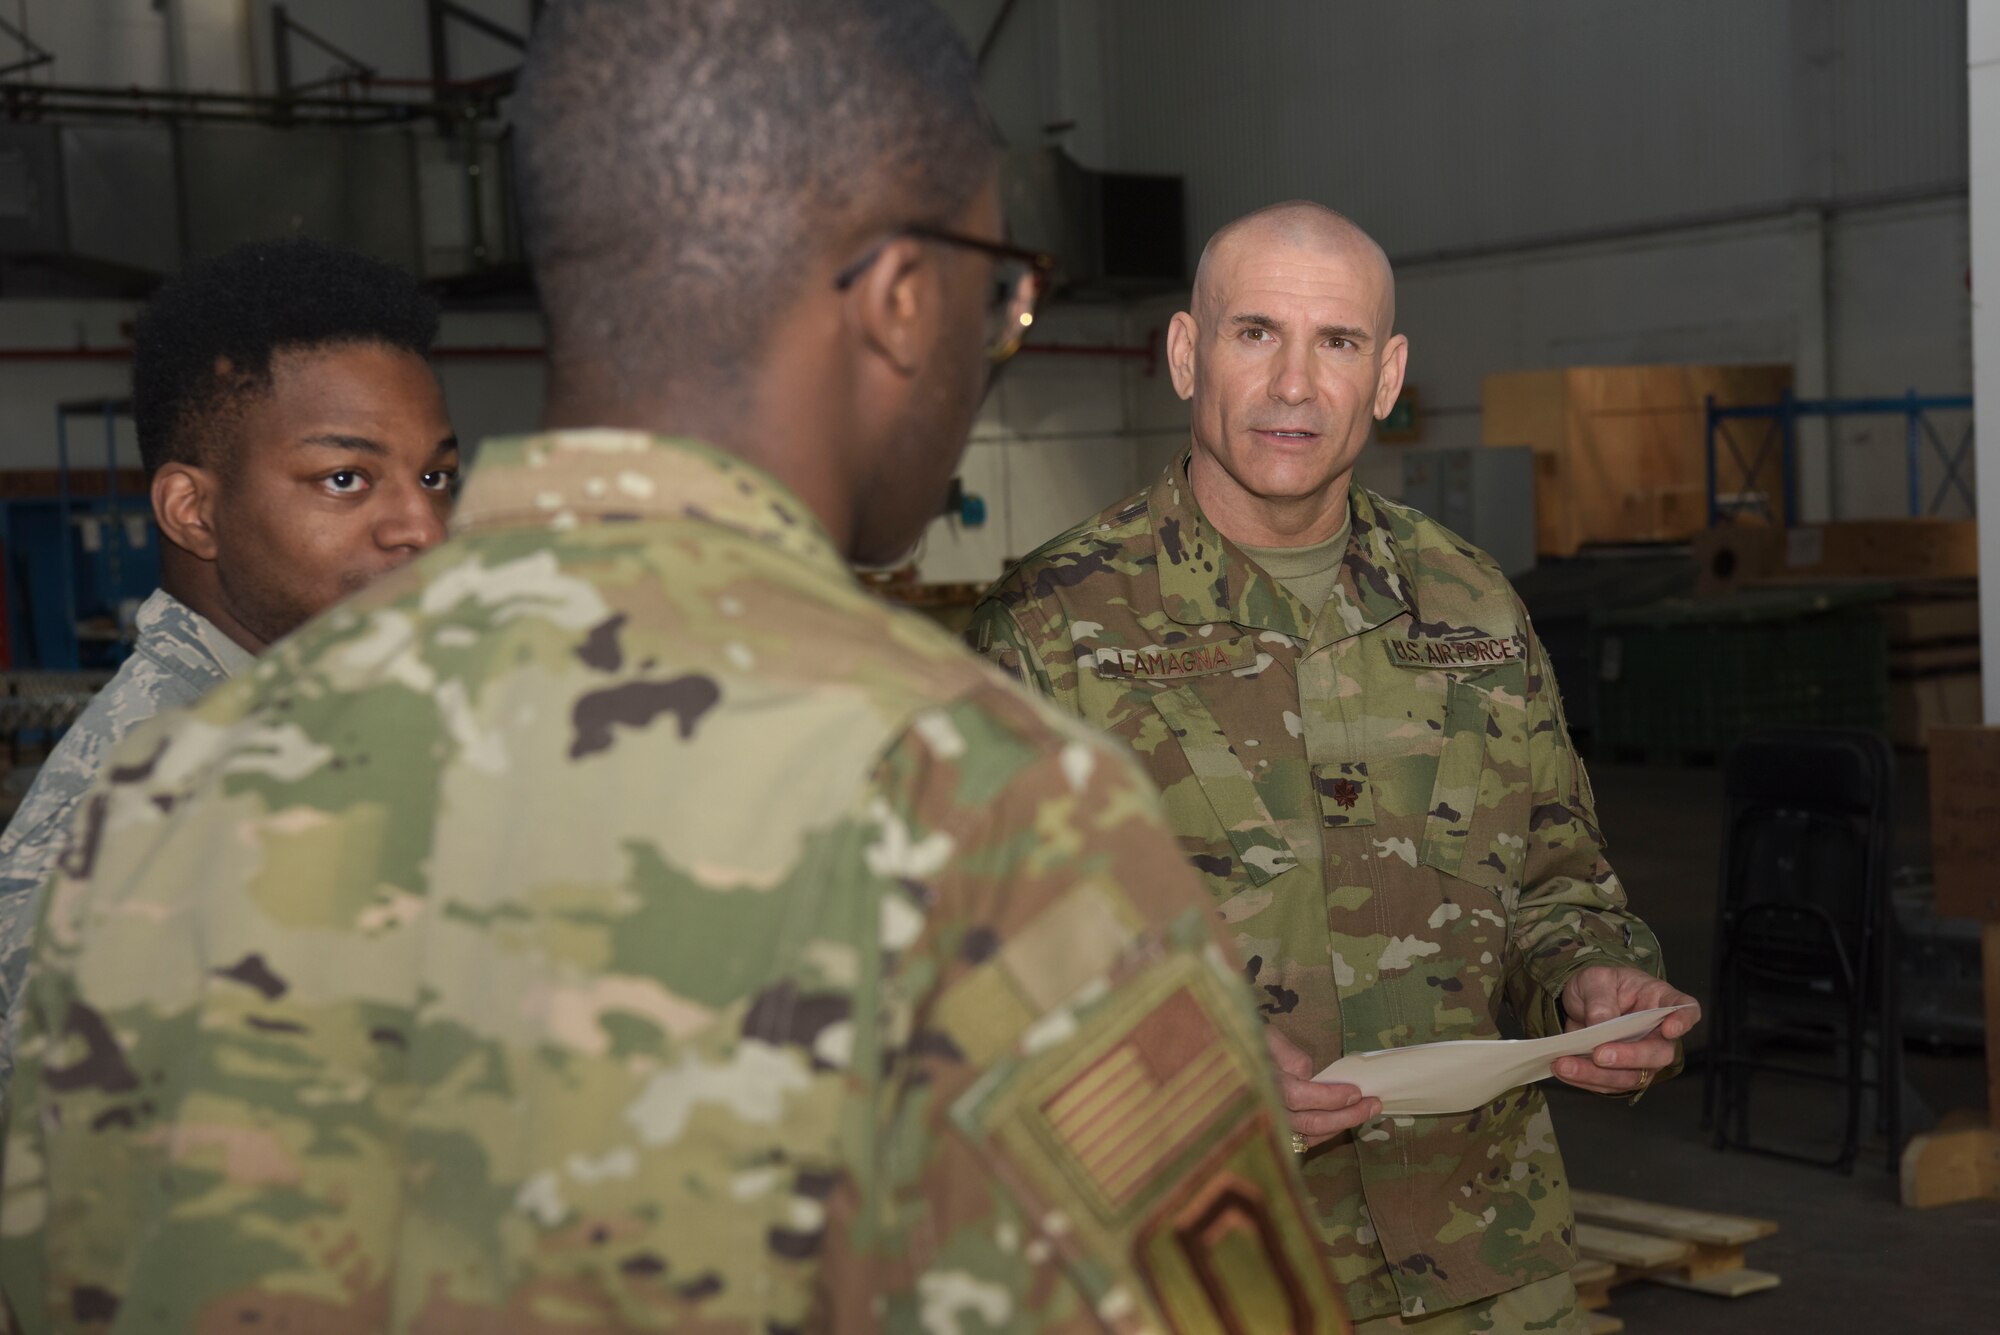 U.S. Air Force Senior Airman Kentral White and Airman 1st Class Jaquavius Johnson, 100th Logistics Readiness Squadron traffic management journeymen, and Maj. Anthony LaMagna, 100th Logistics Readiness Squadron commander, discuss shipping orders for an outbound package at RAF Mildenhall, England, May 2, 2019. LaMagna participates in ‘Walking with Warriors’ once a week, where all leadership leave their desk and interact with Airmen, from top leadership on down.   (U.S. Air Force photo by Senior Airman Alexandria Lee)